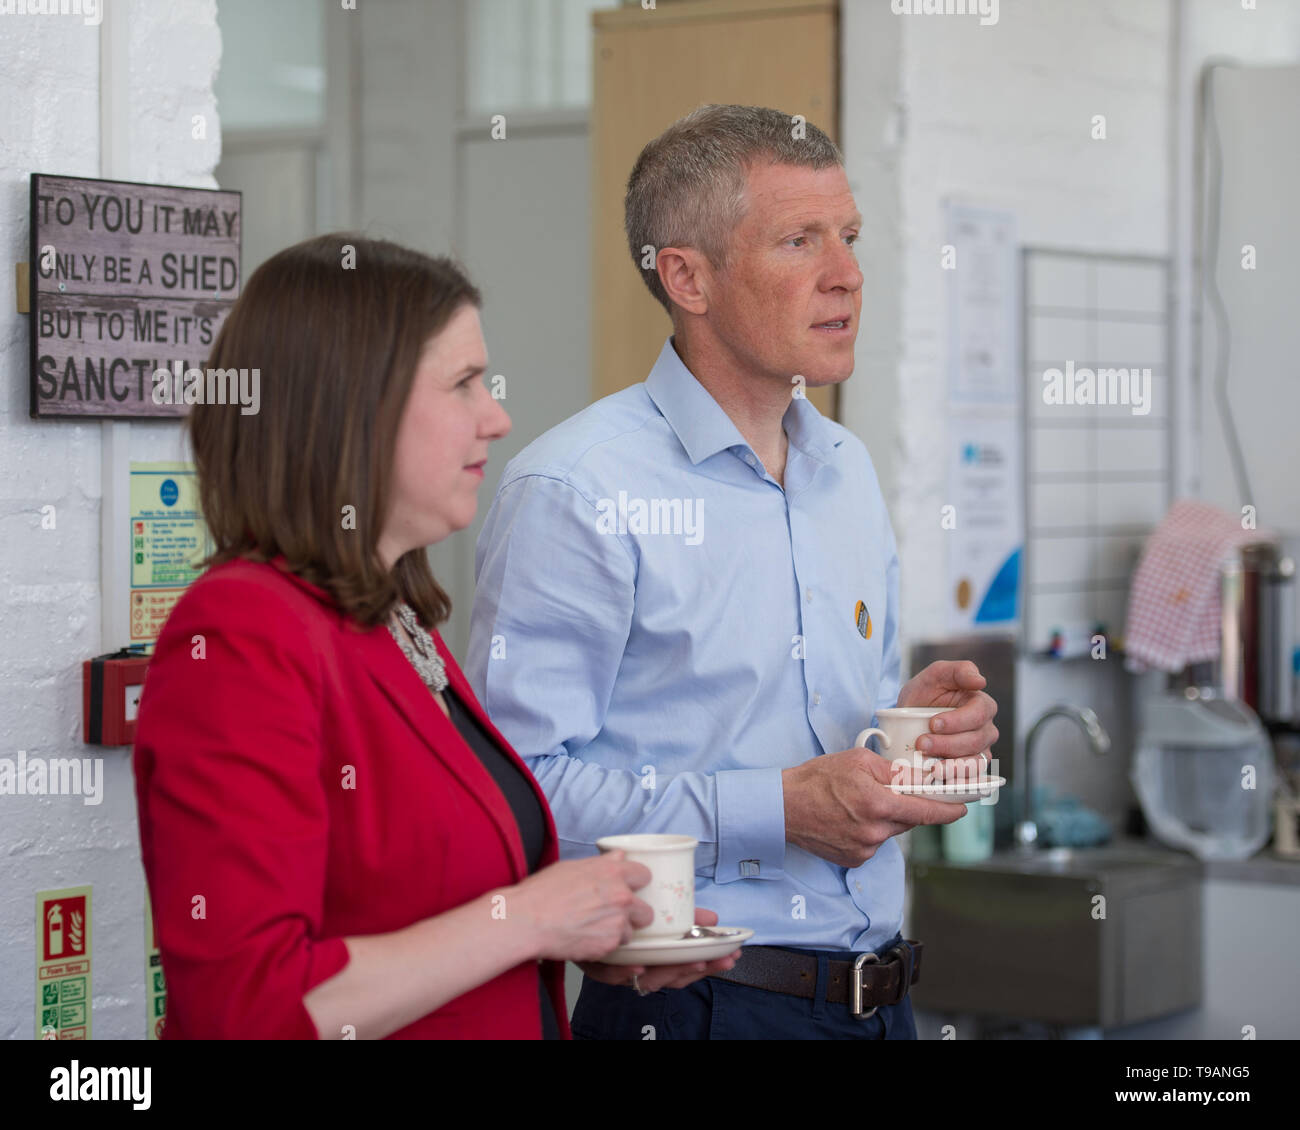 Glasgow, UK. 17 May 2019.  Pictured: (left-right) Jo Swinson - Deputy Leader of the Lib Dems; Willie Rennie MSP - Leader of the Scottish Lib Dems.  During Mental Health Awareness week, Scottish Liberal Democrat Leader, Willie Rennie and Liberal Democrat Deupty Leader, Jo Swinson visit Milngavie & Bearsden's Men's Shed mental health initiative to highlight the issues we should be focusing on instead of Brexit. Credit: Colin Fisher/Alamy Live News Stock Photo